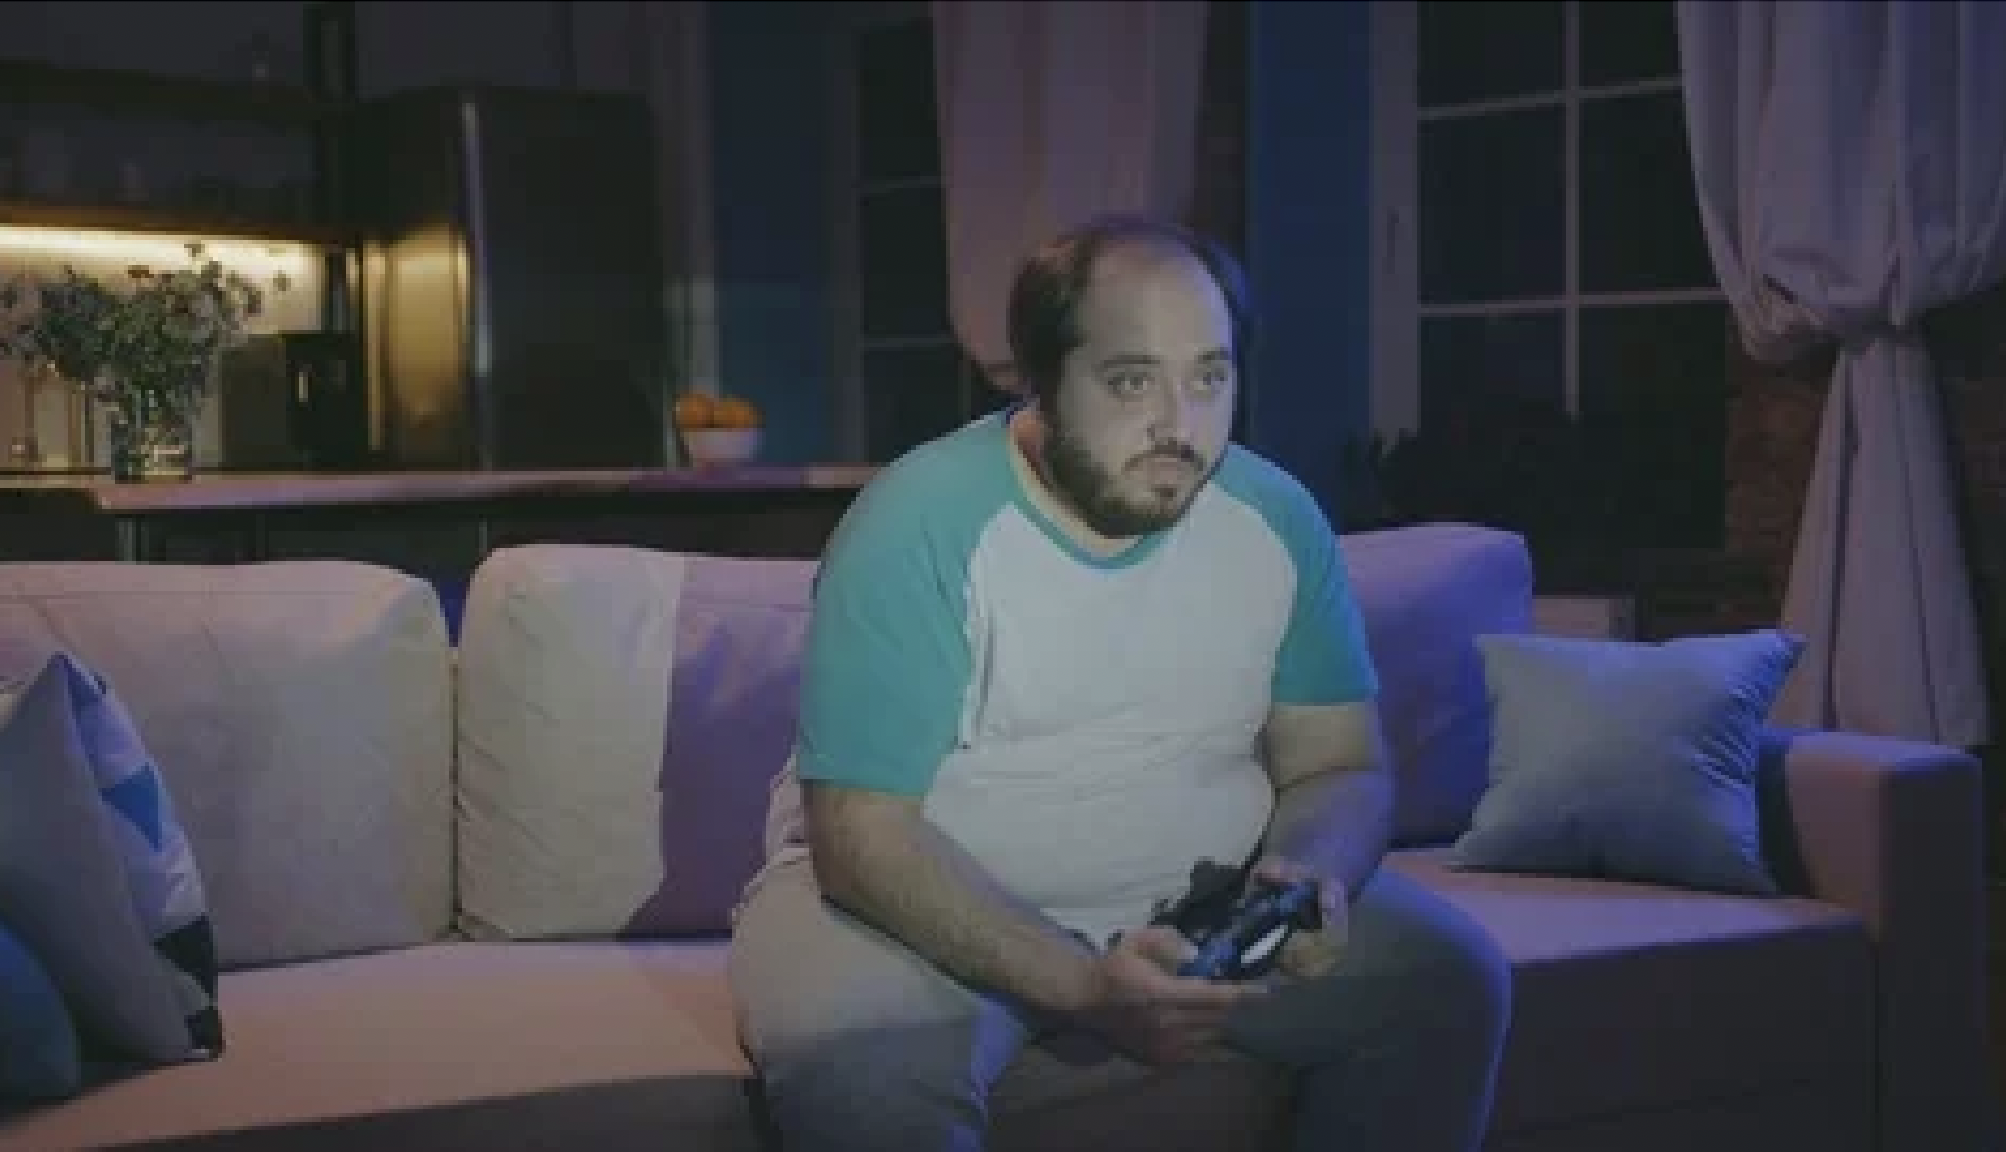 Man on couch playing video game in dark room